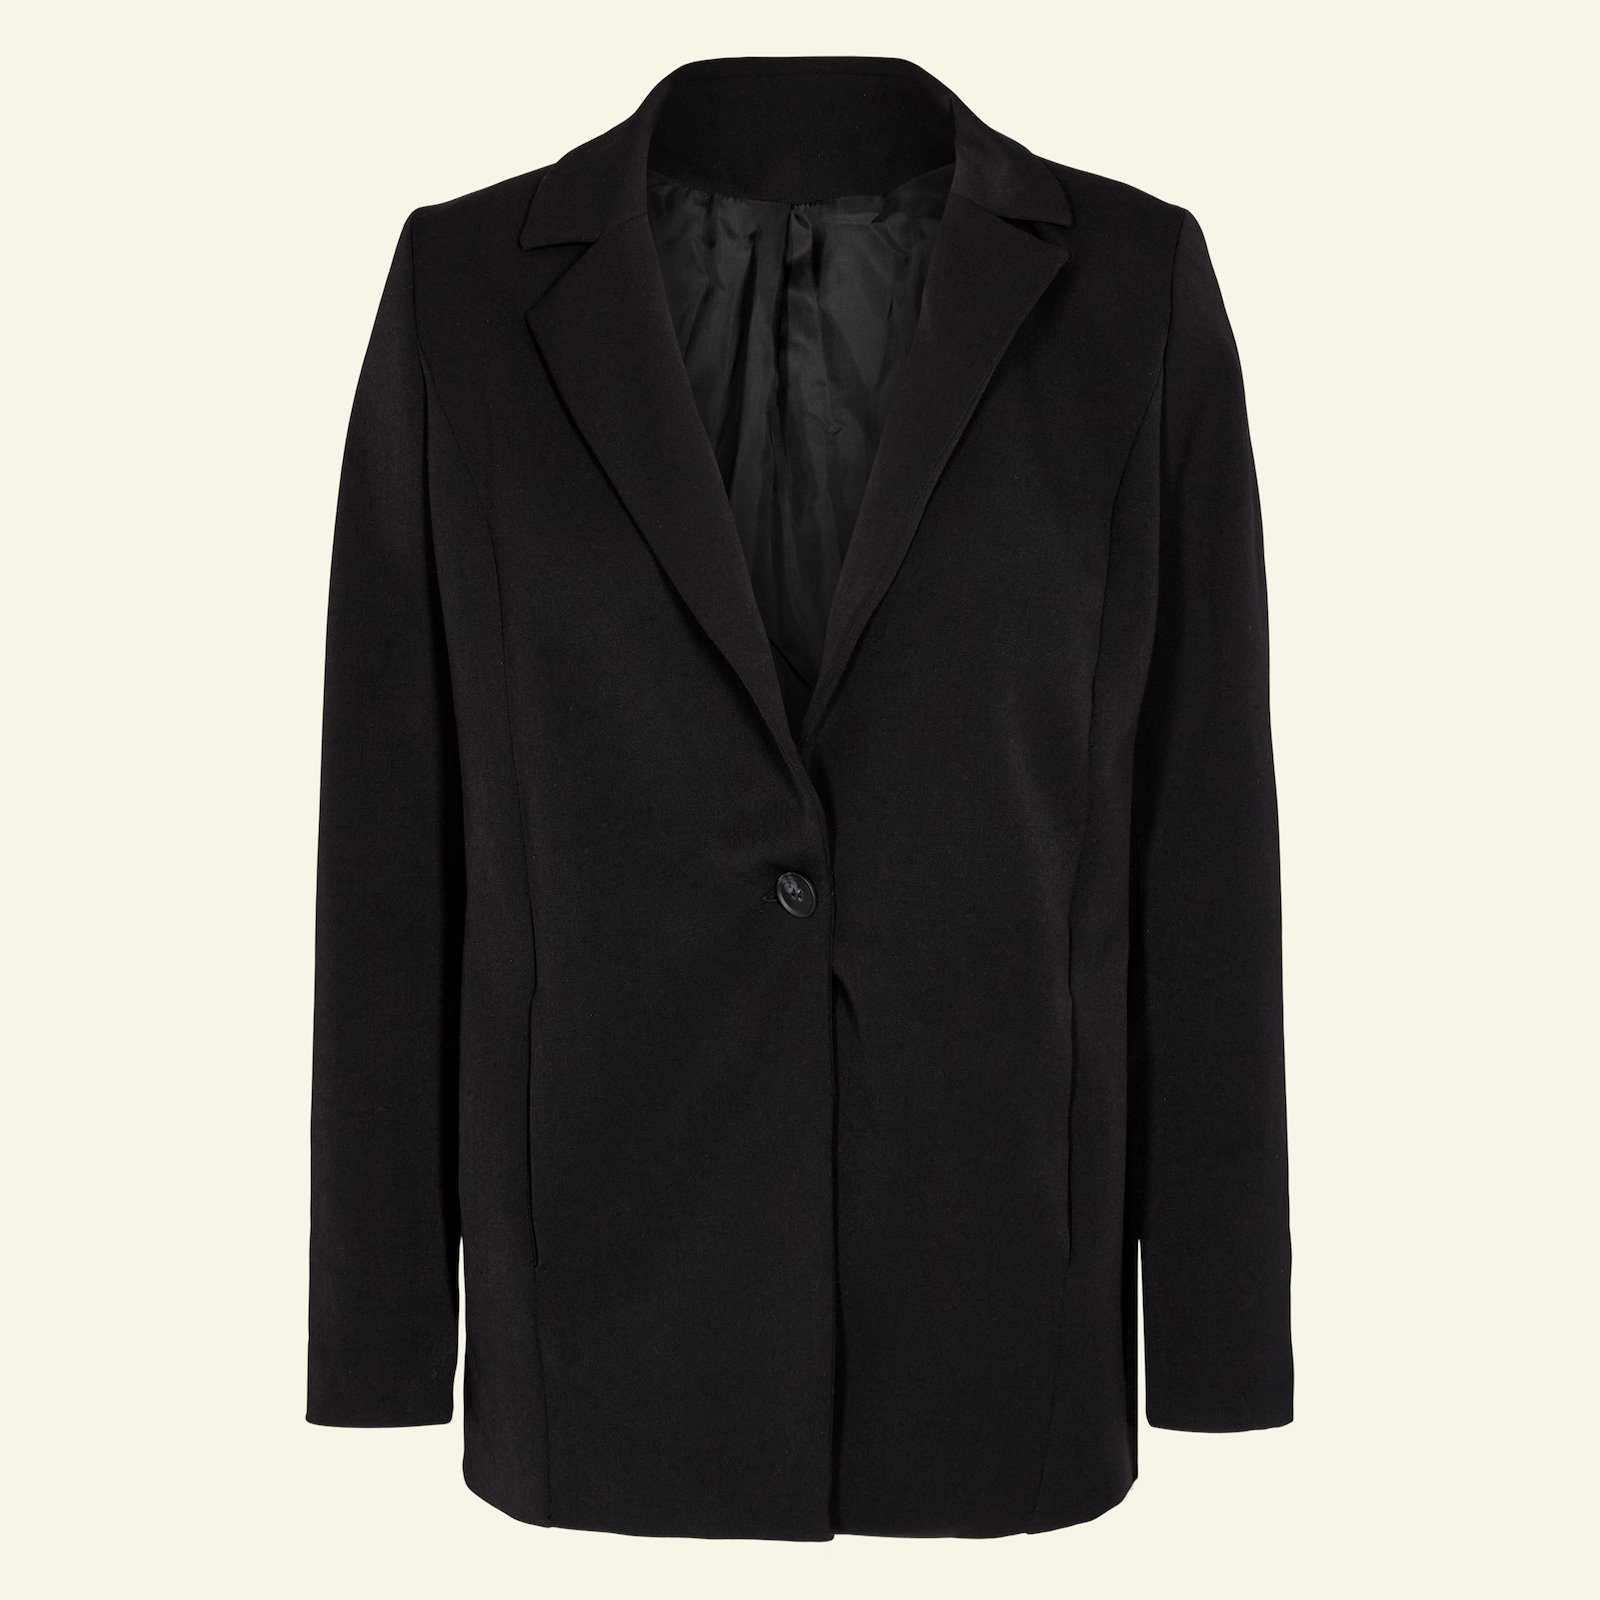 Suit jacket with lining, 38/10 p24048_460563_5043_40237_sskit